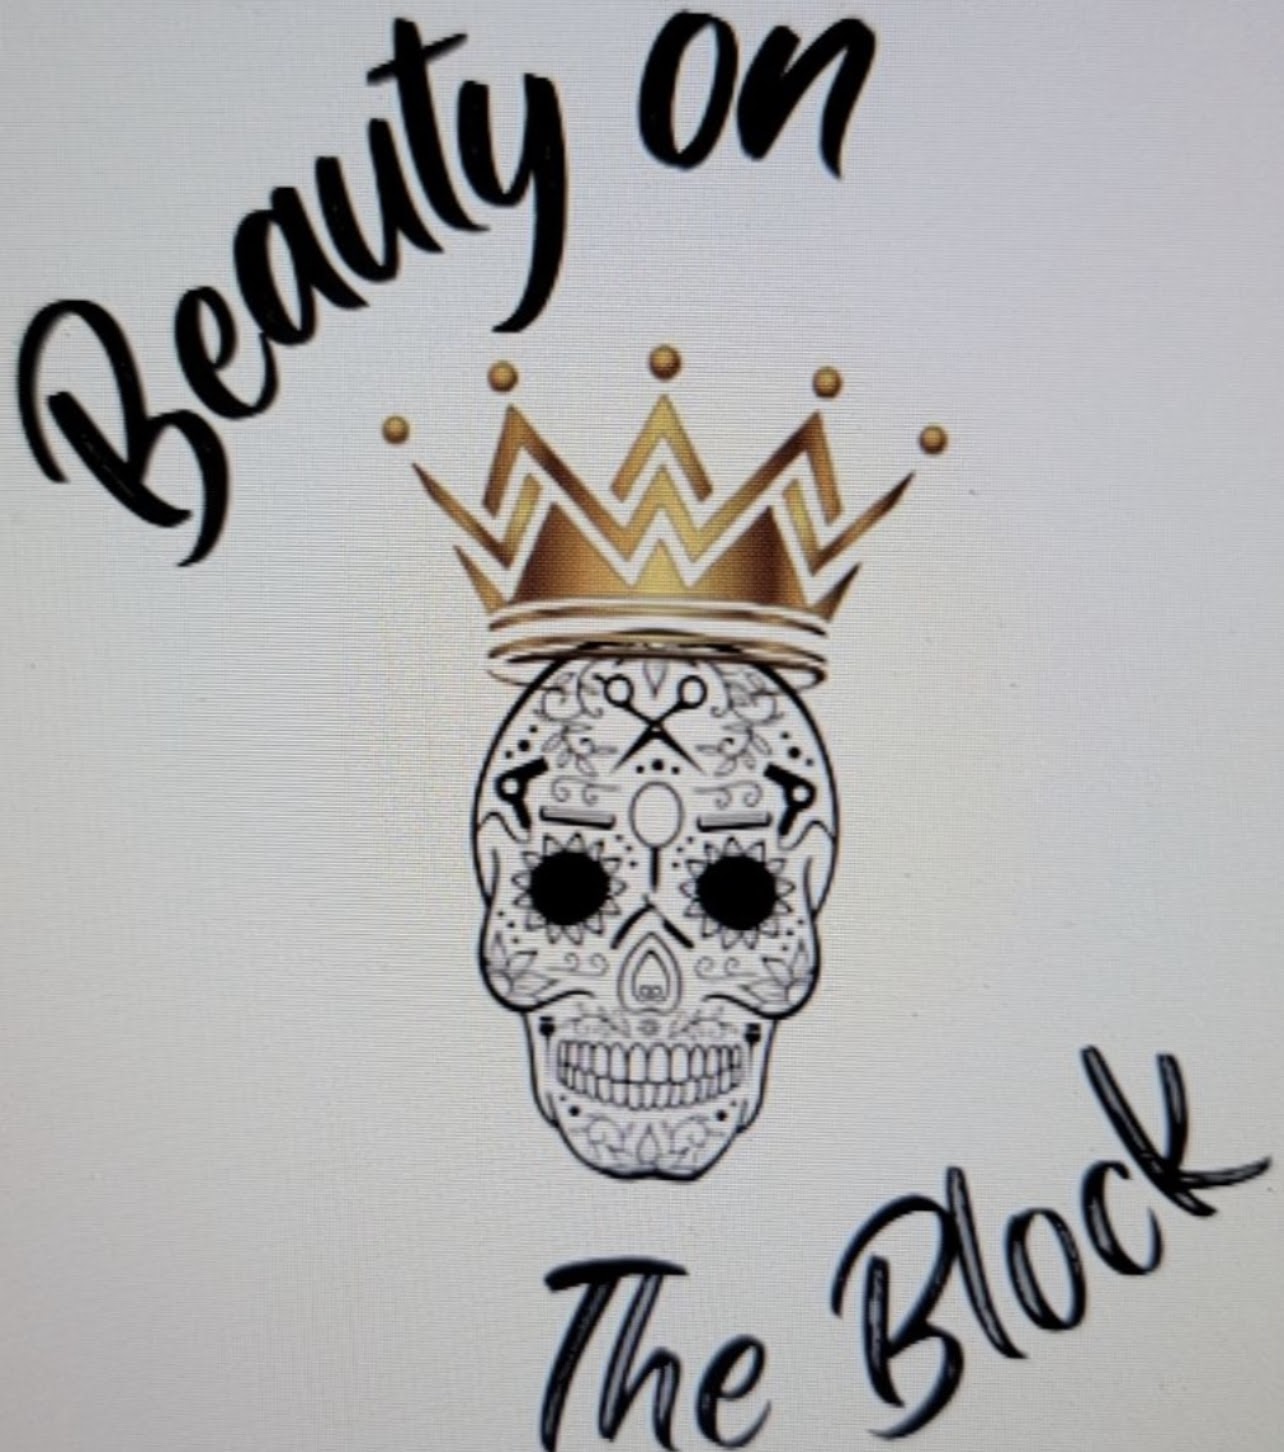 Beauty on the block 140 Division St, Grandview Washington 98930